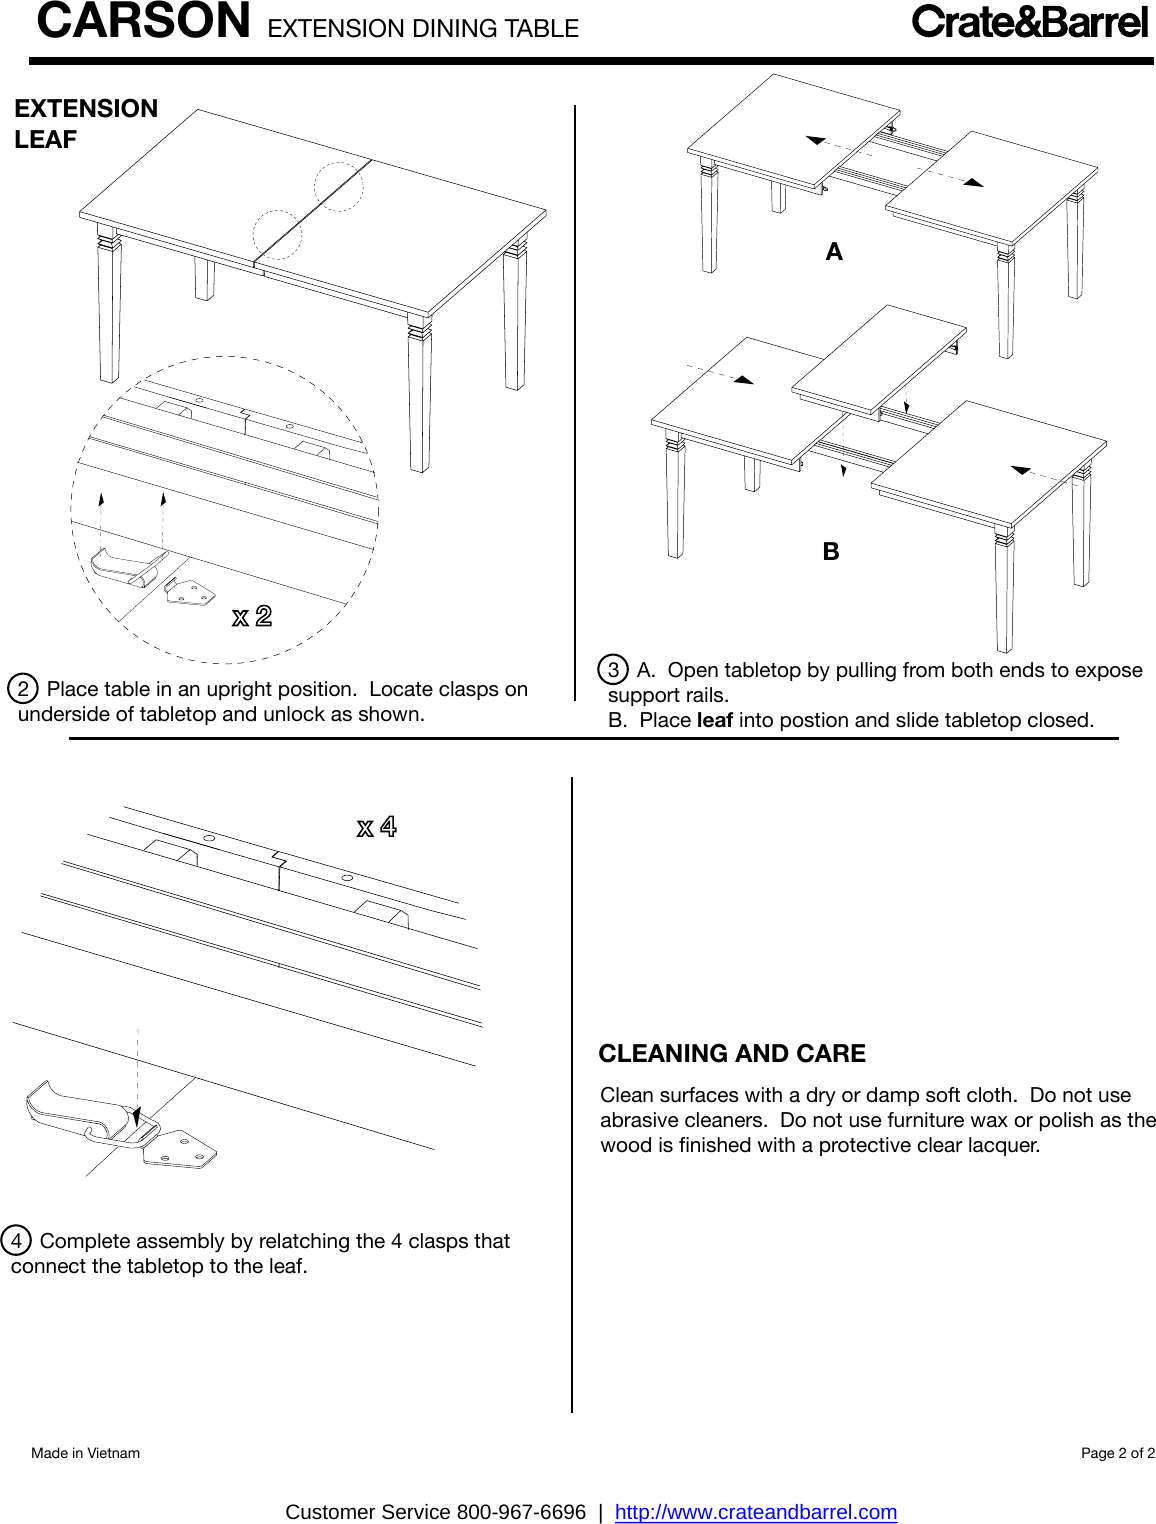 Page 2 of 2 - Crate-Barrel 363-Carson-Extension-Dining-Table Carson Extension Dining Table Assembly Instructions From Crate And Barrel